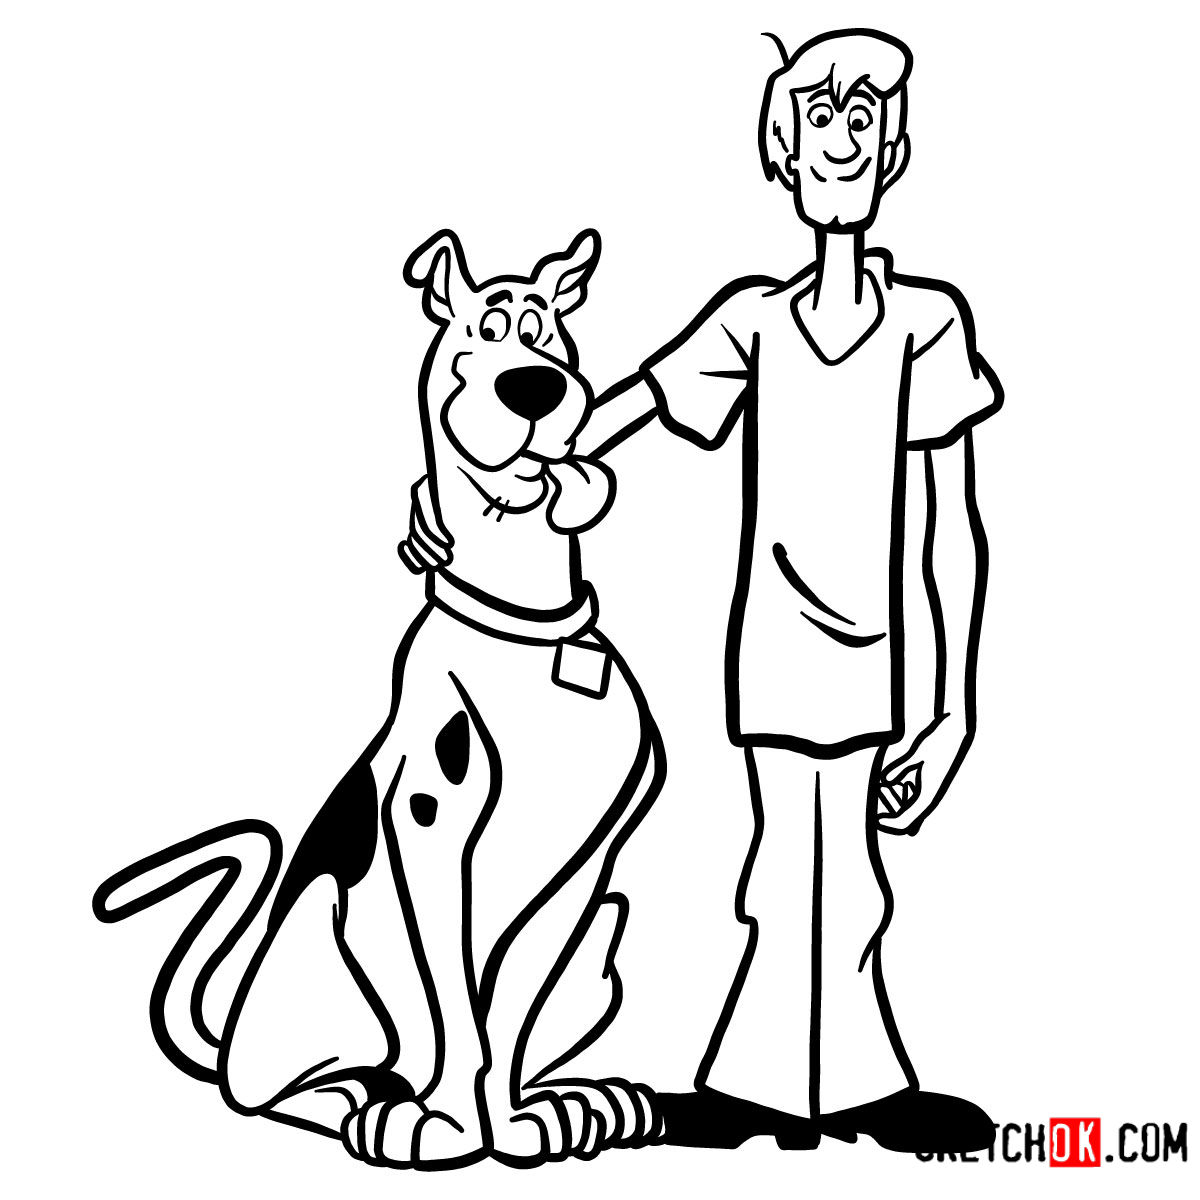 How to draw Scooby-Doo and Shaggy Rogers